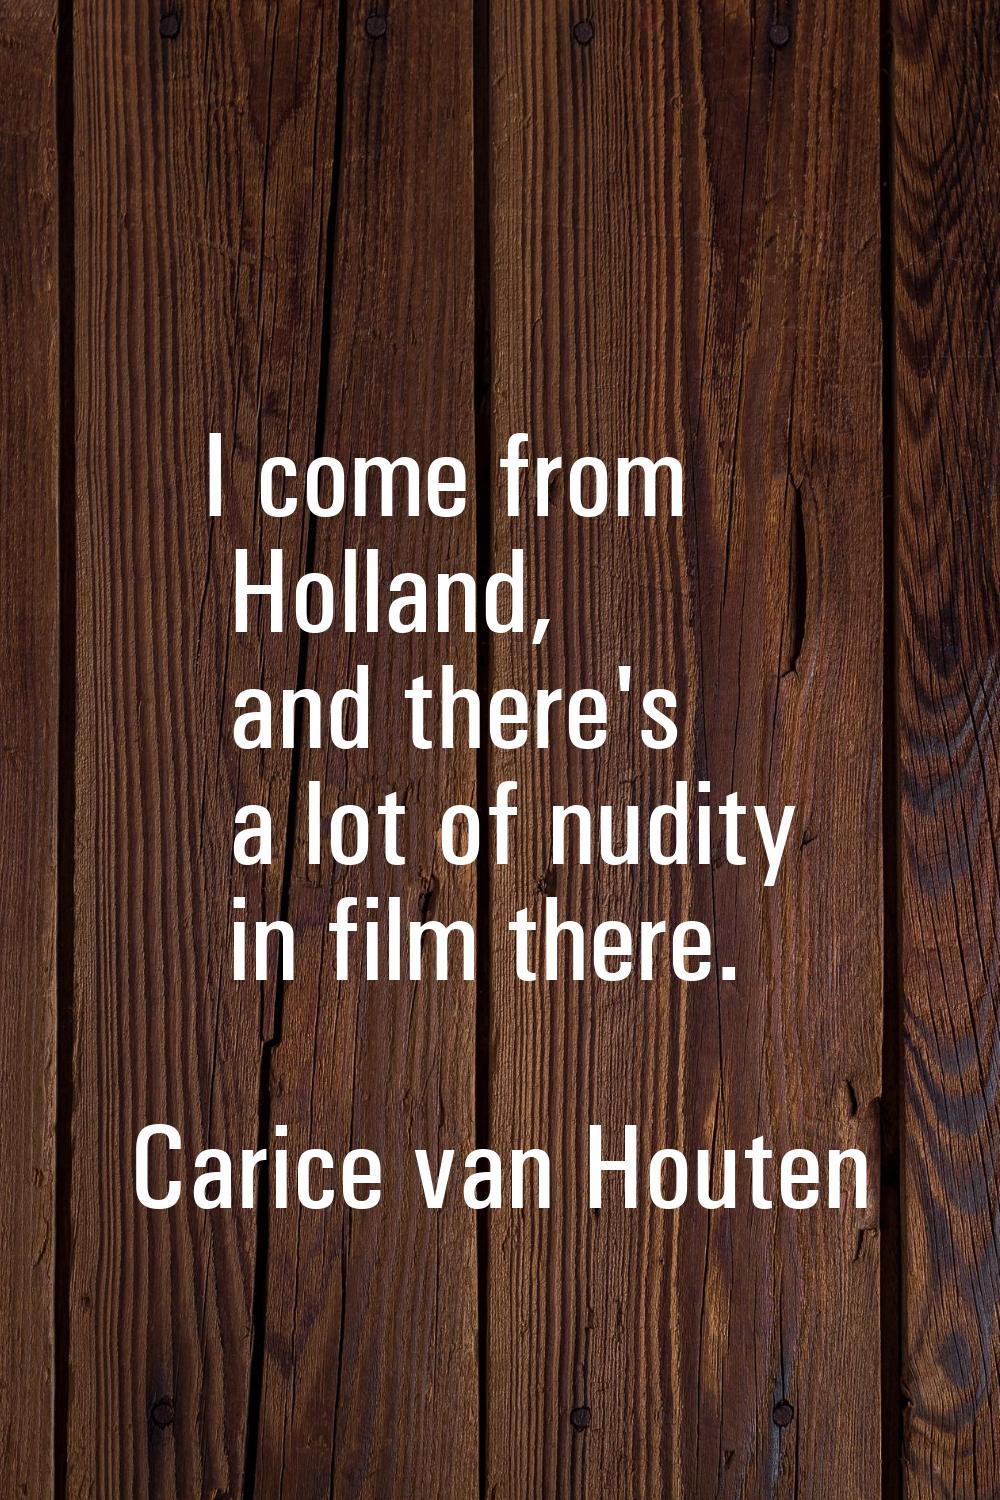 I come from Holland, and there's a lot of nudity in film there.